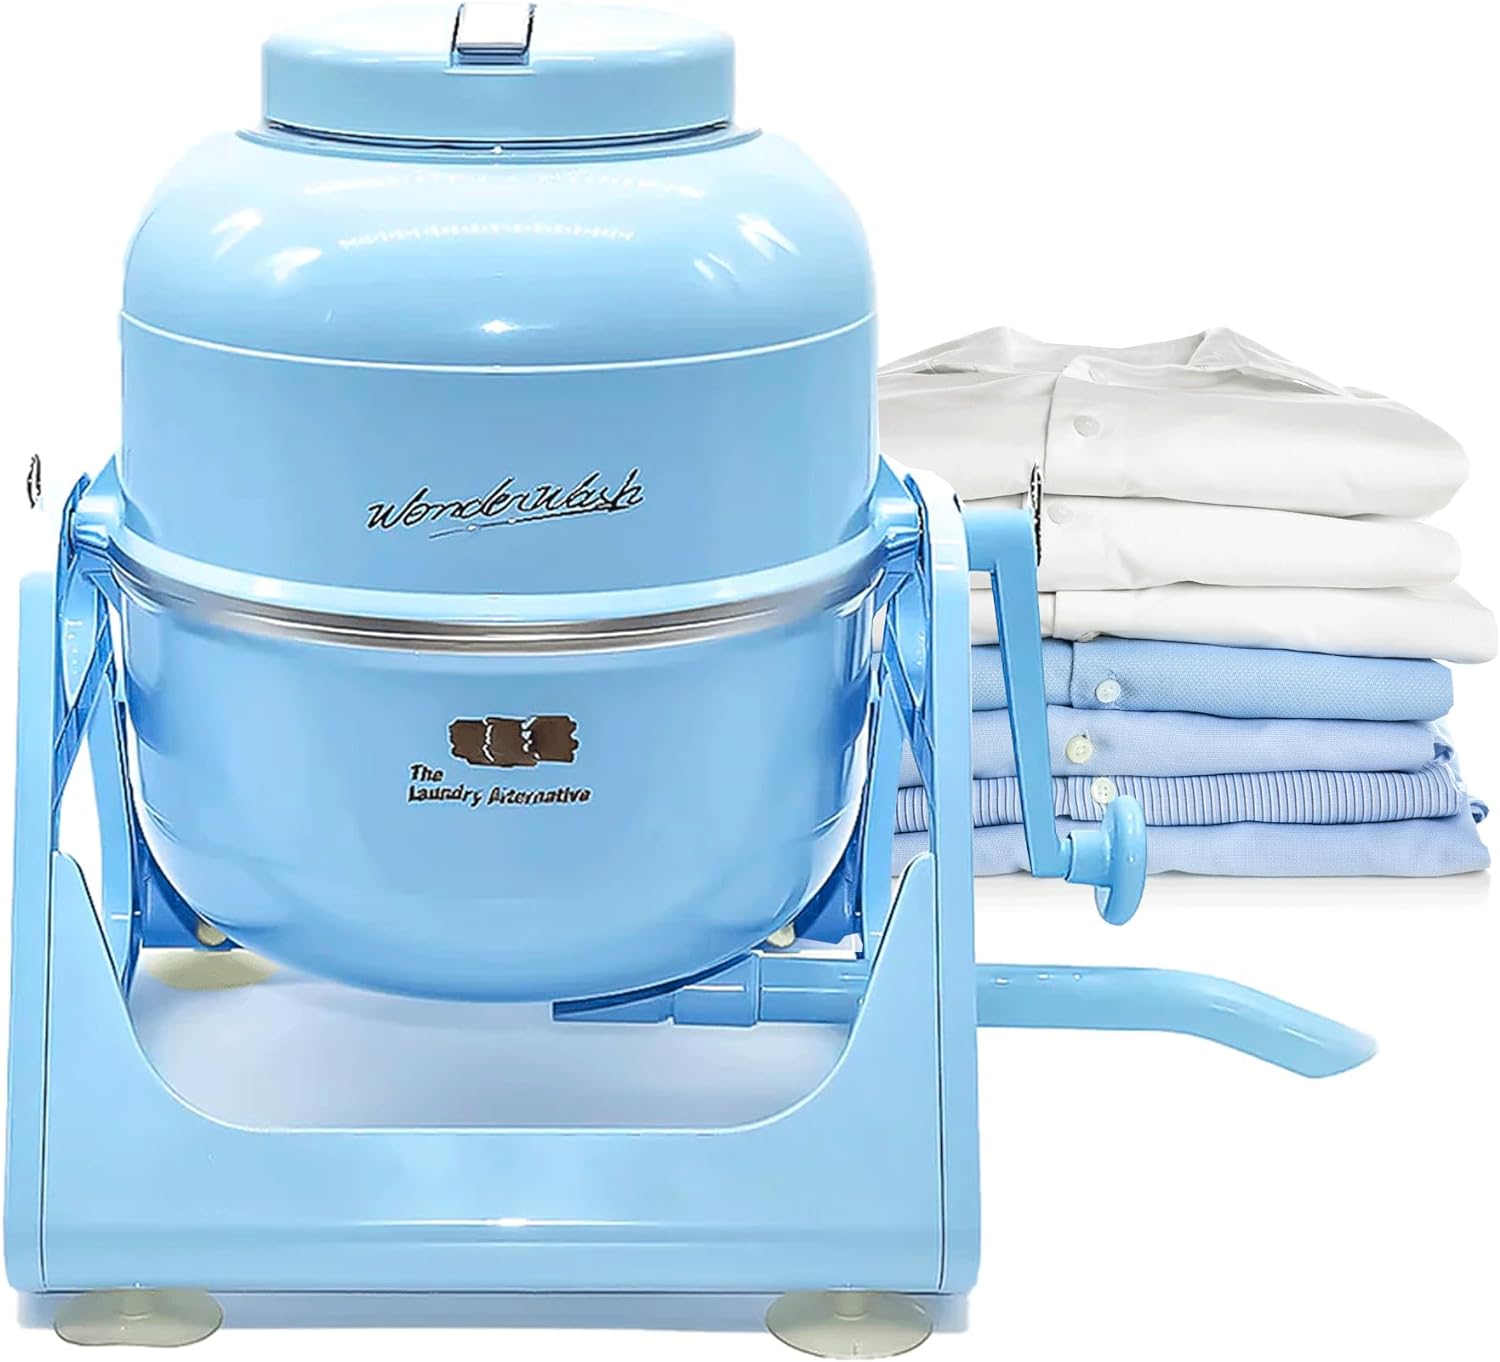 A light blue manual washing machine with hand crank sits next to a stack of folded laundry.